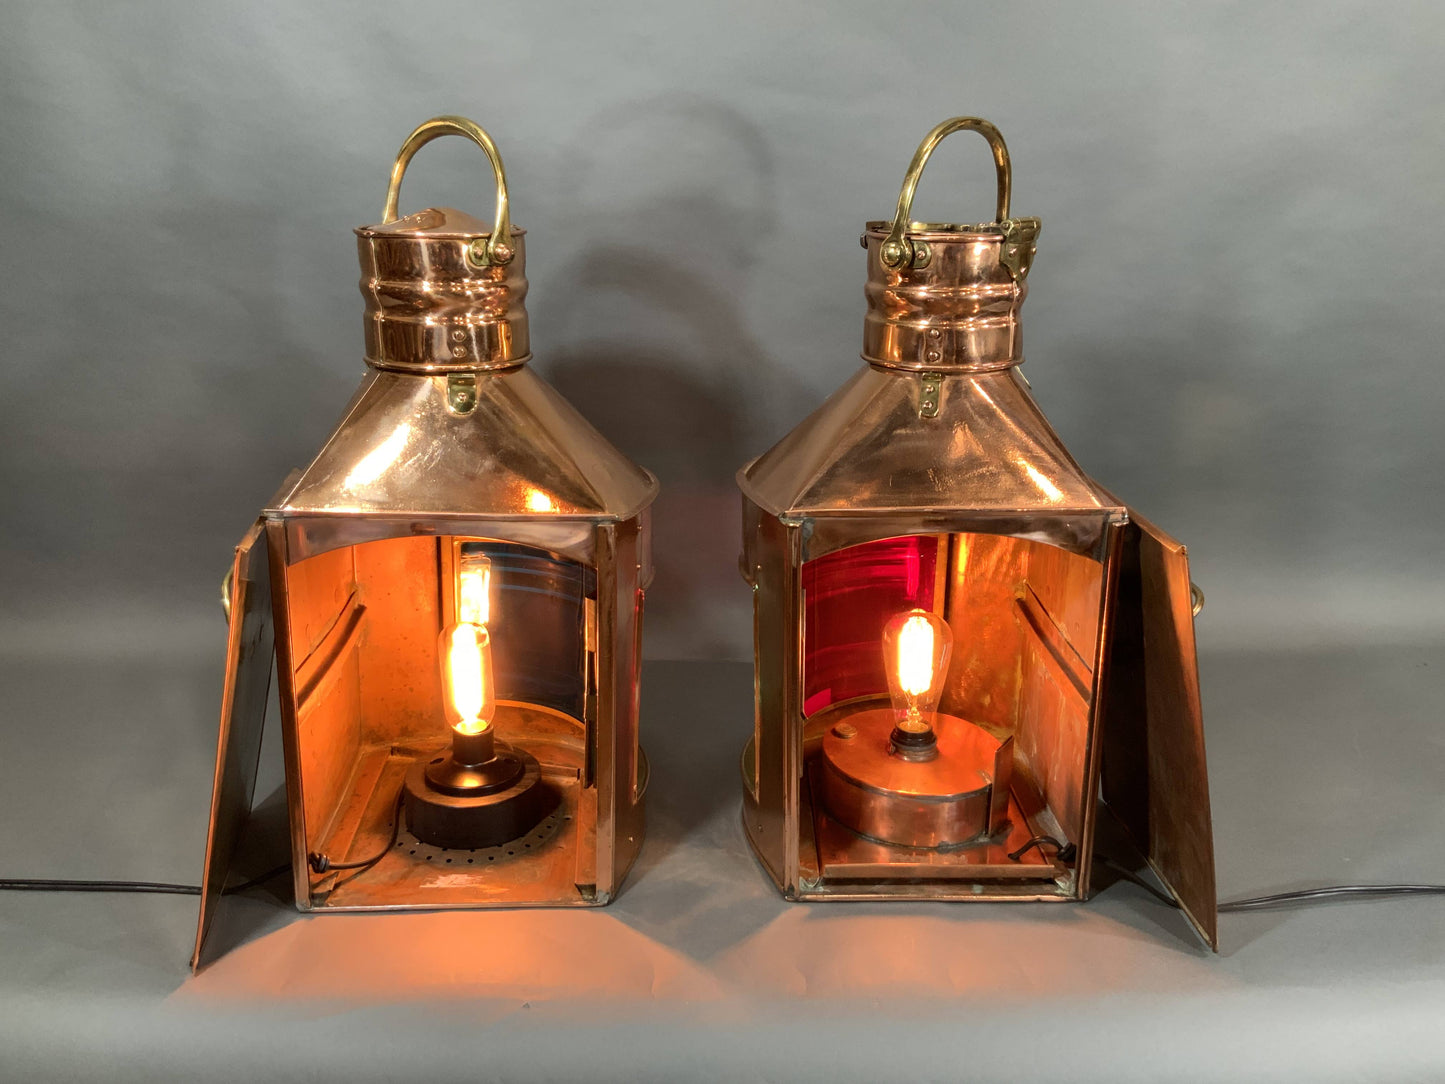 Giant Pair of Copper Port & Starboard Ships Lanterns by Meteorite- 12402 & 19204